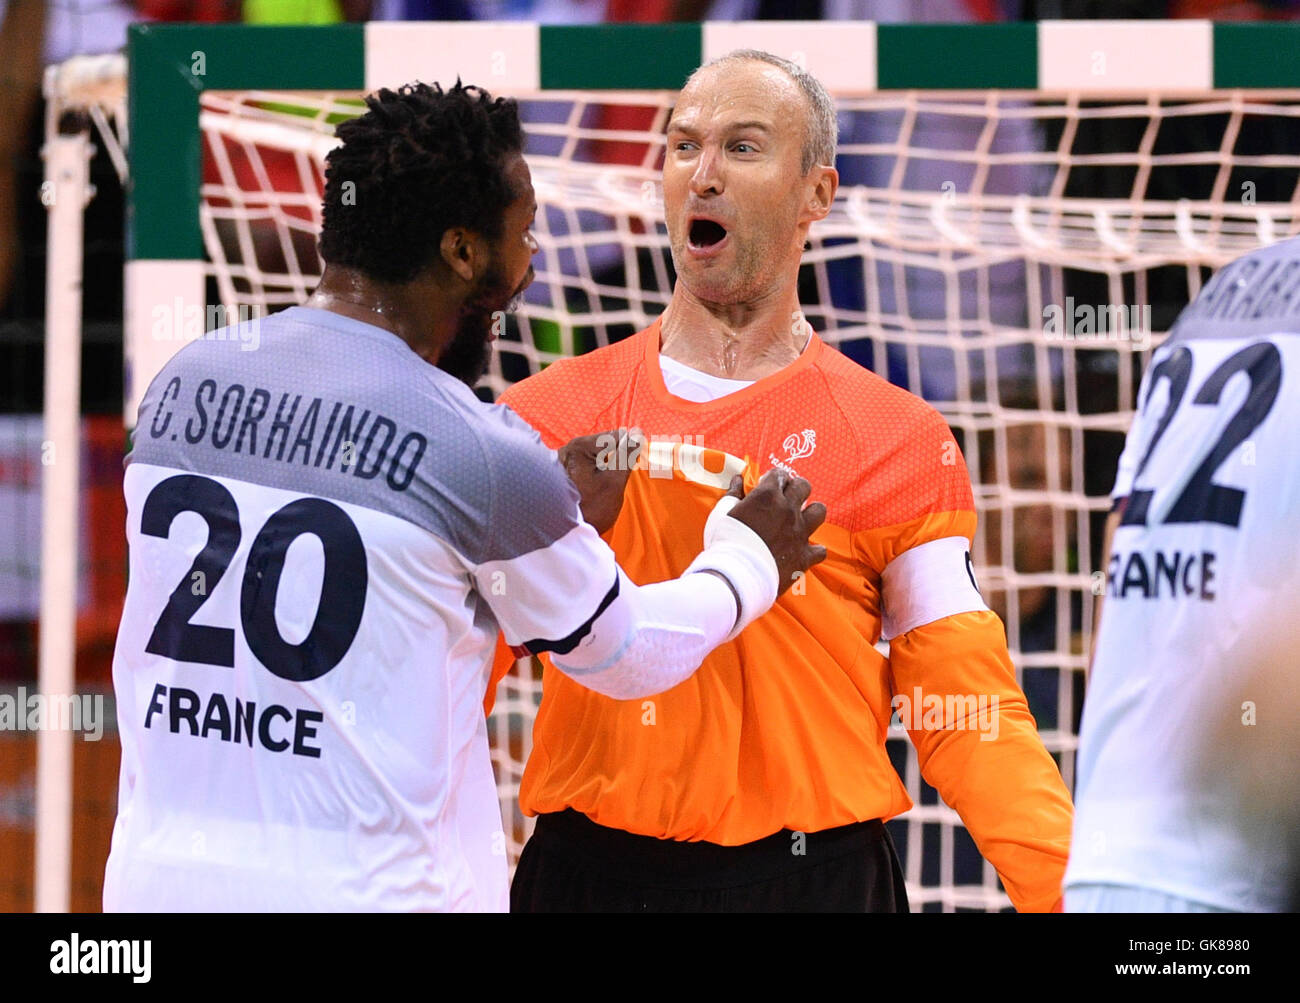 Rio de Janeiro, Brazil. 19th Aug, 2016. Goalkeeper Thierry Omeyer and Cedic Sorhaindo of France celebrate during the Men's Semifinal match between France and Germany of the Handball events during the Rio 2016 Olympic Games in Rio de Janeiro, Brazil, 19 August 2016. Photo: Lukas Schulze /dpa/Alamy Live News Stock Photo